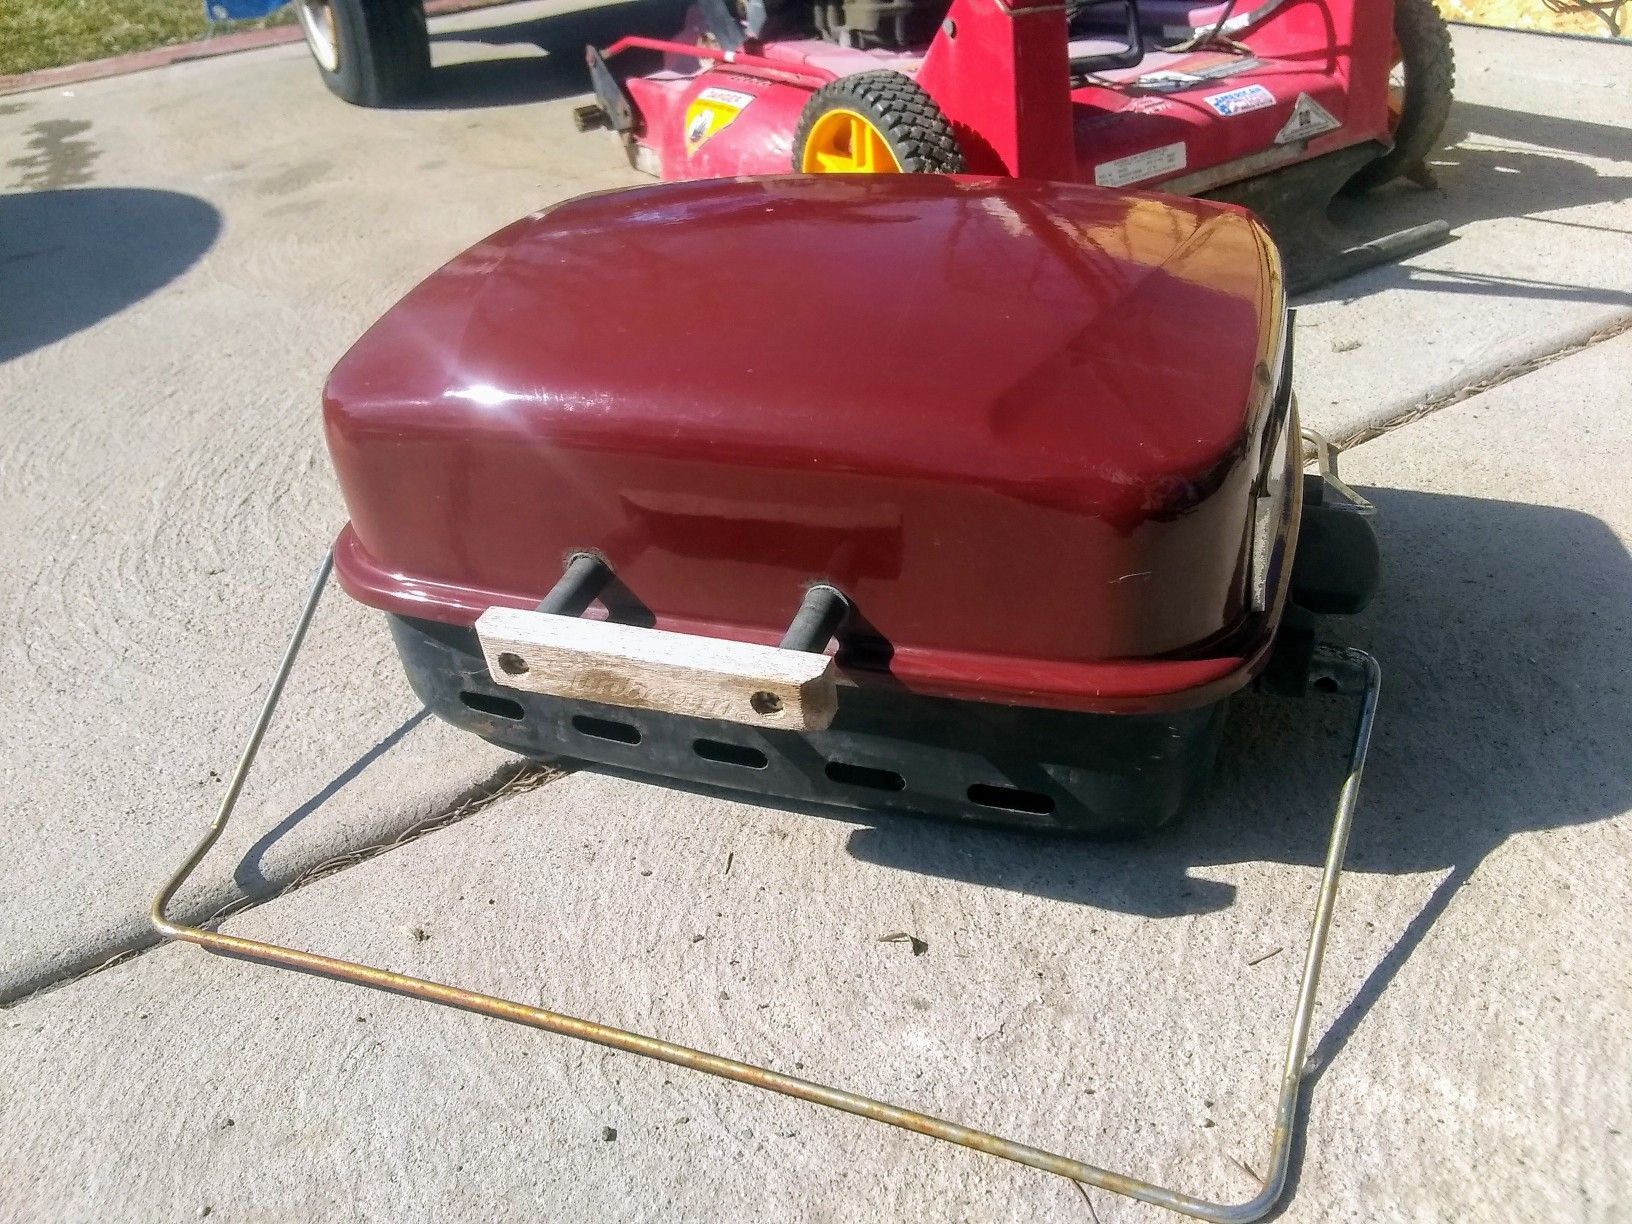 Red Portable BBQ Grill